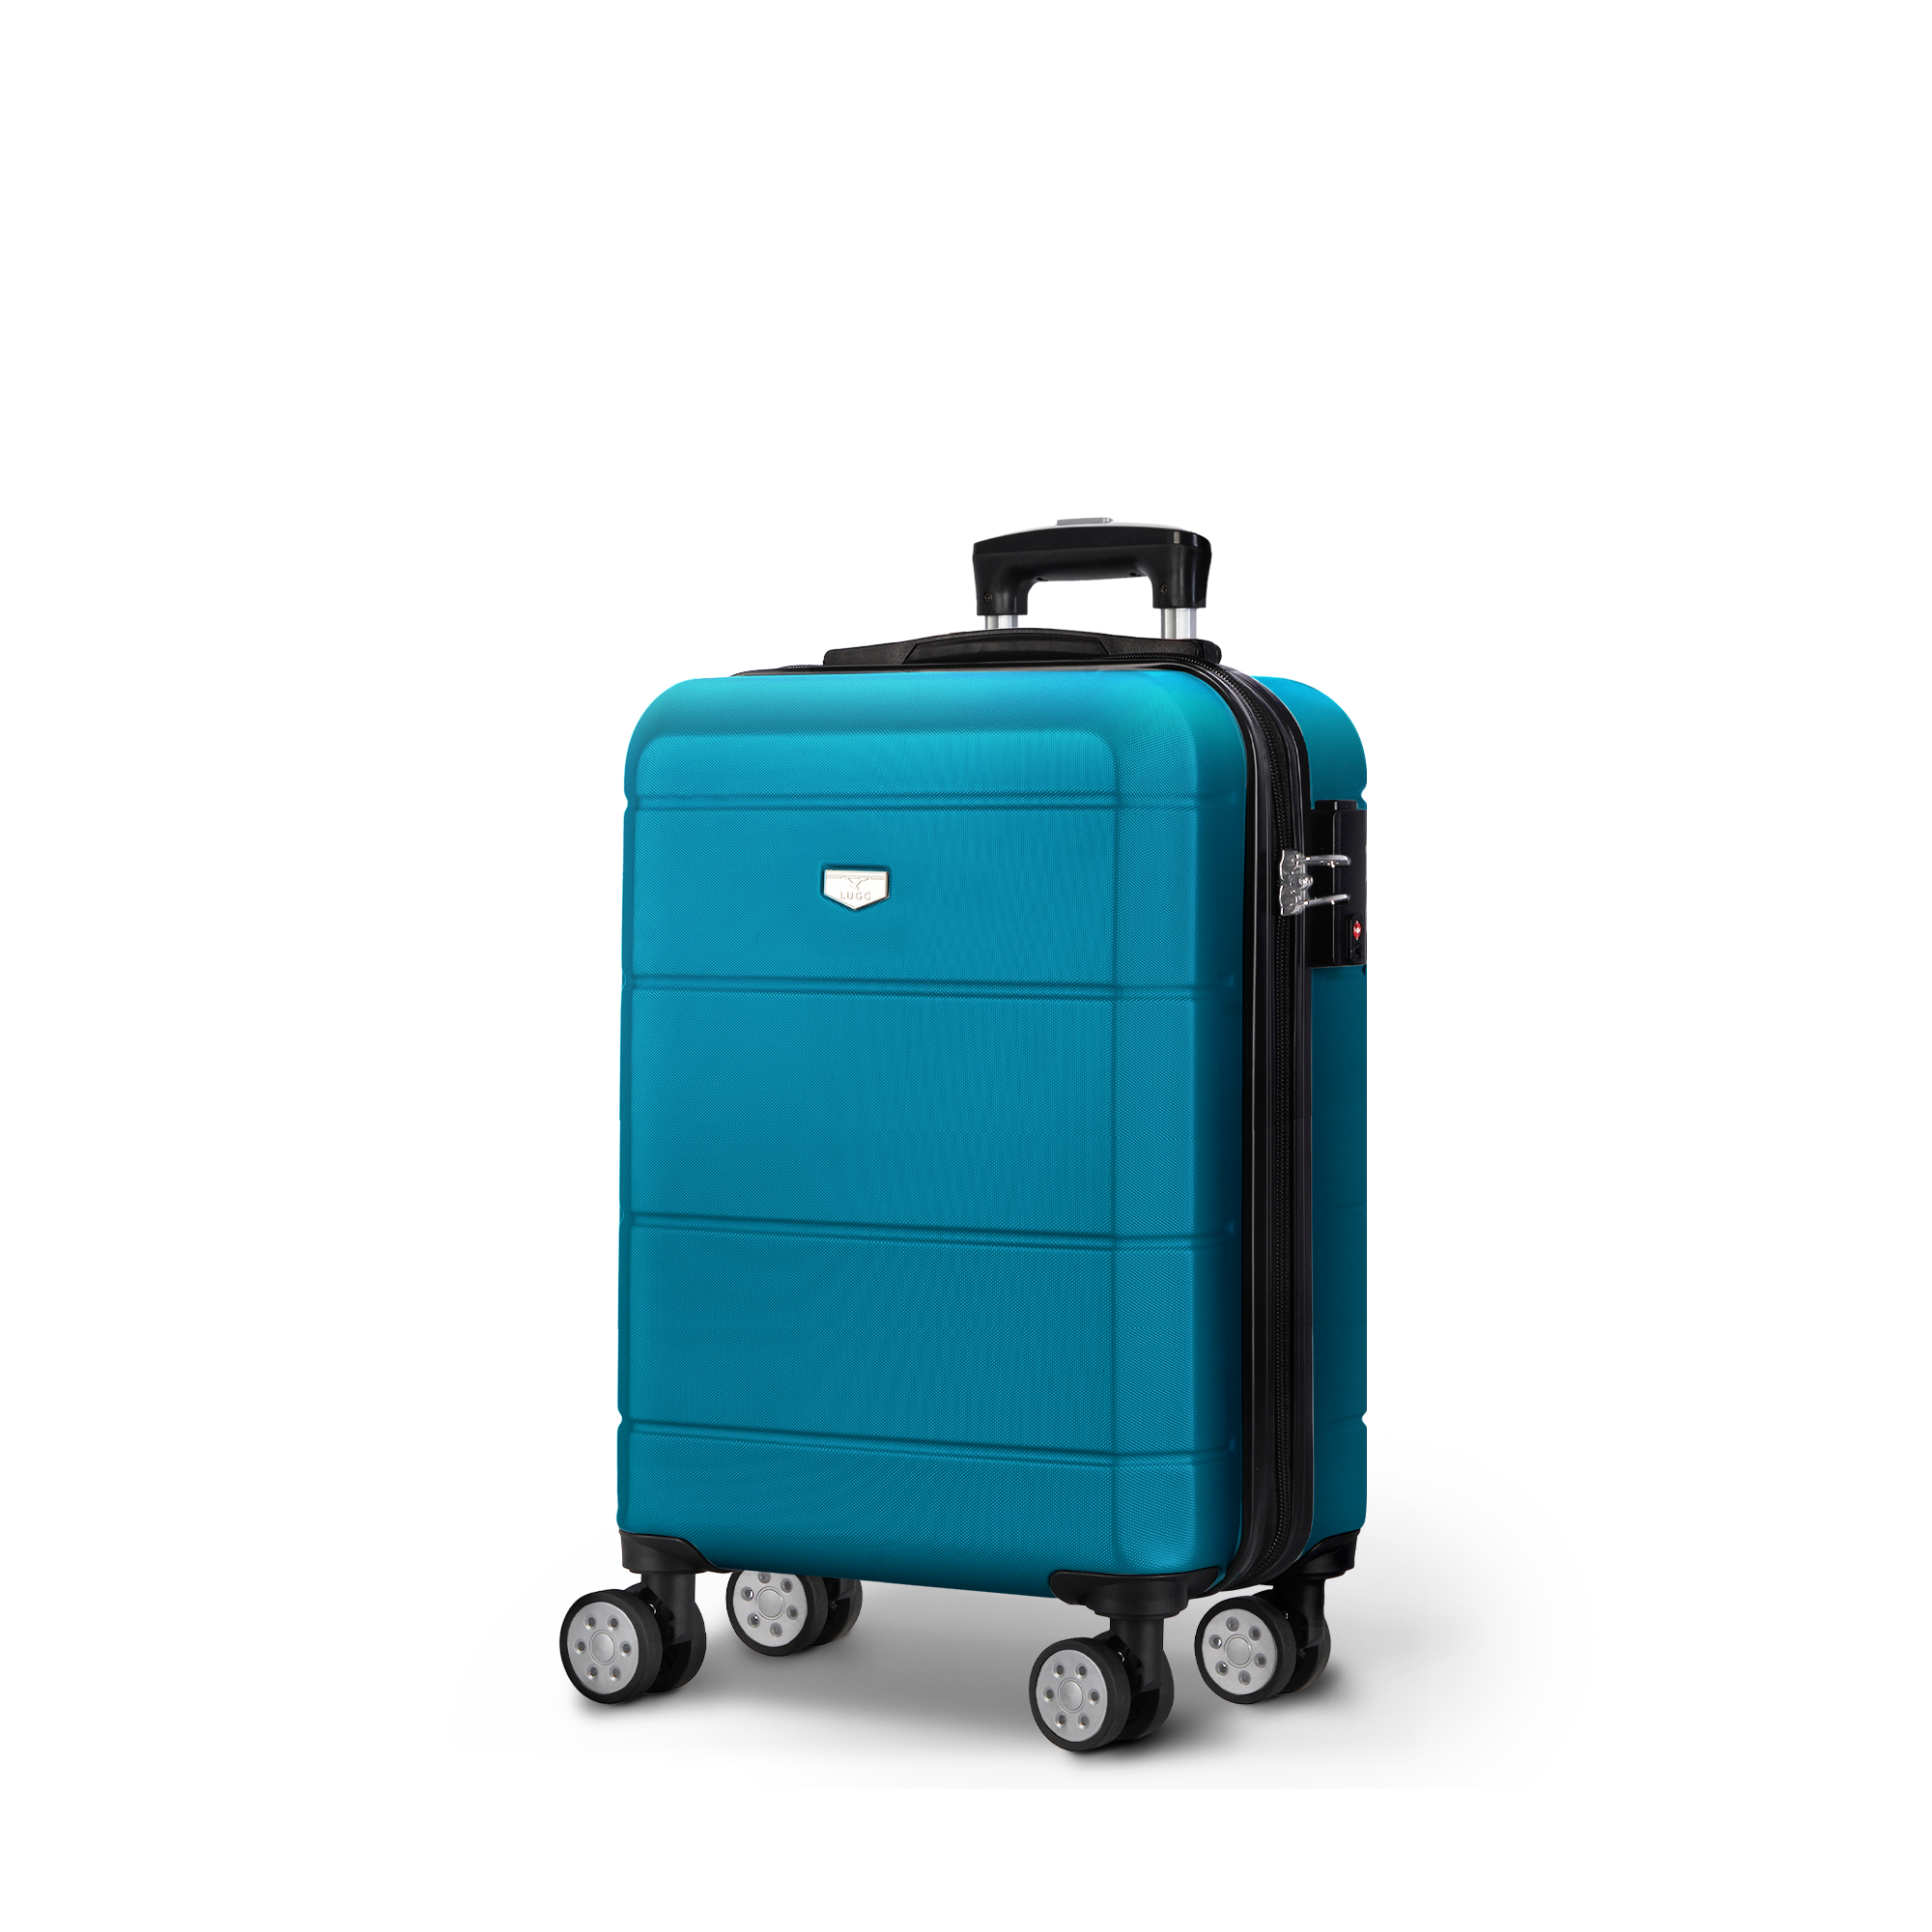 Jetset 20-inch Suitcase in Teal